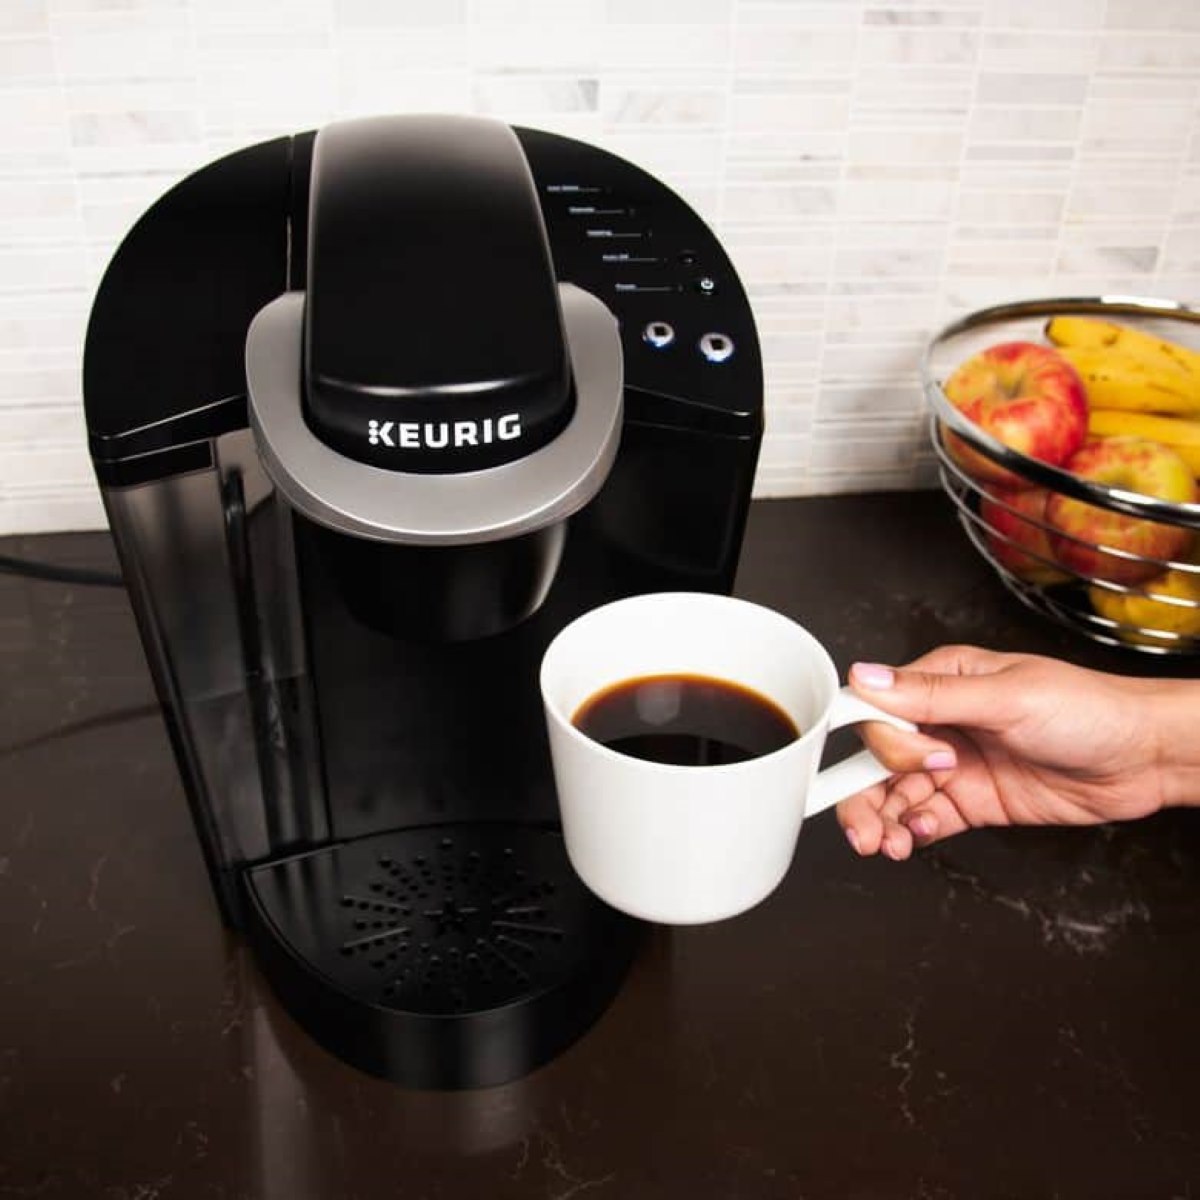 How To Store A Keurig Coffee Maker